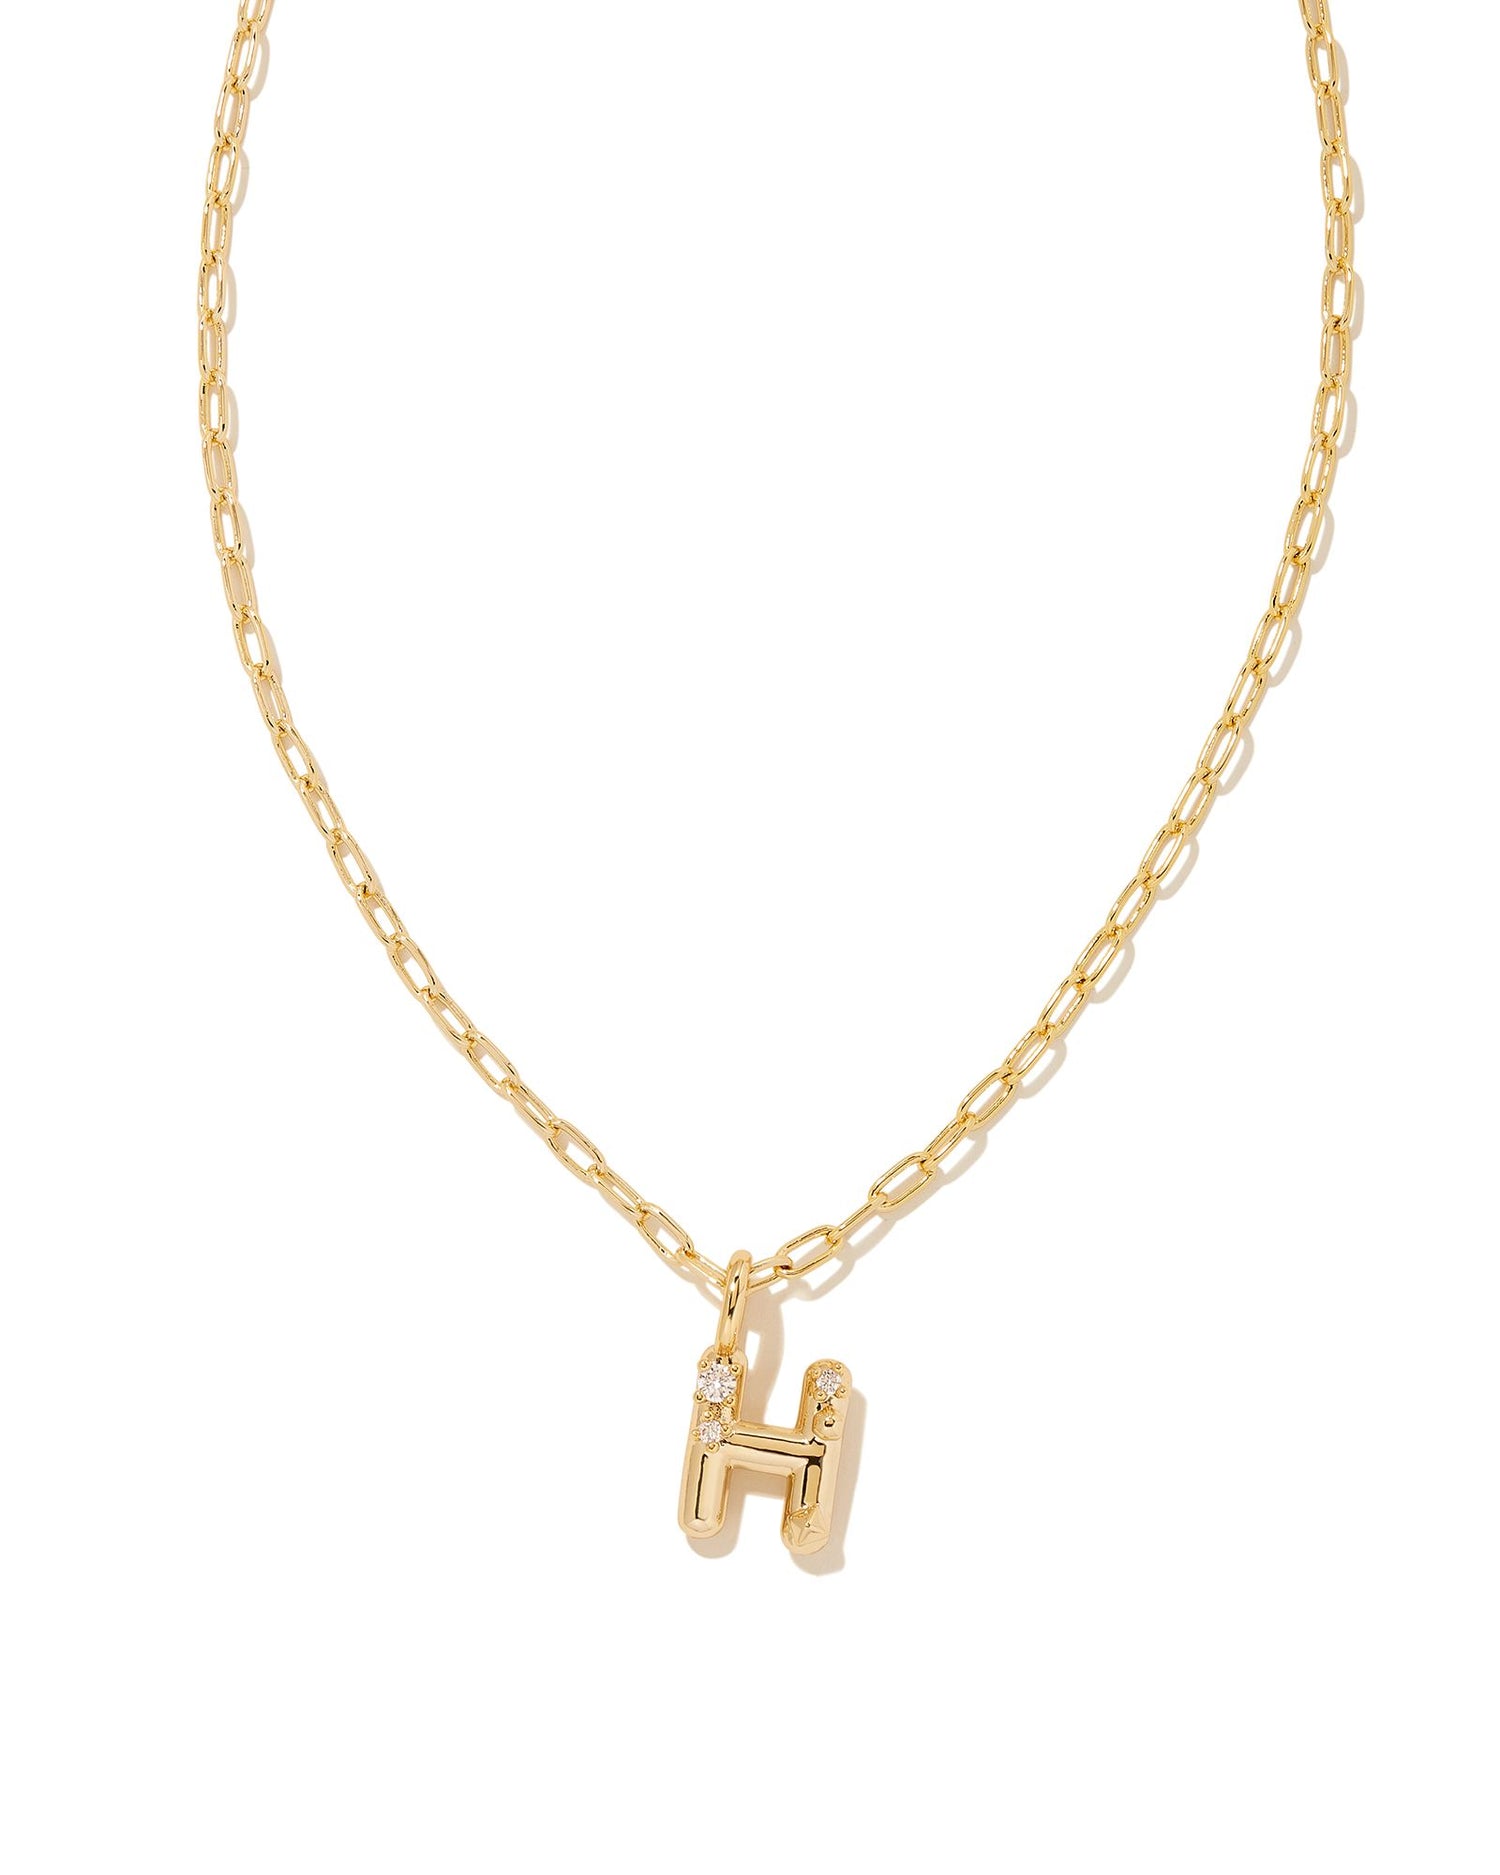 Personalize your everyday look with the Crystal Letter Short Pendant Necklace in White Crystal. Whether you’re rocking your initial or a loved one’s, this sentimental layer is one you’ll keep coming back to again and again.  Dimensions- 16' CHAIN WITH 3' EXTENDER, 0.62'L X 0.35"W PENDANT Metal- 14K Gold plated over brass Closure- Lobster Clasp Material-   White CZ Letter H